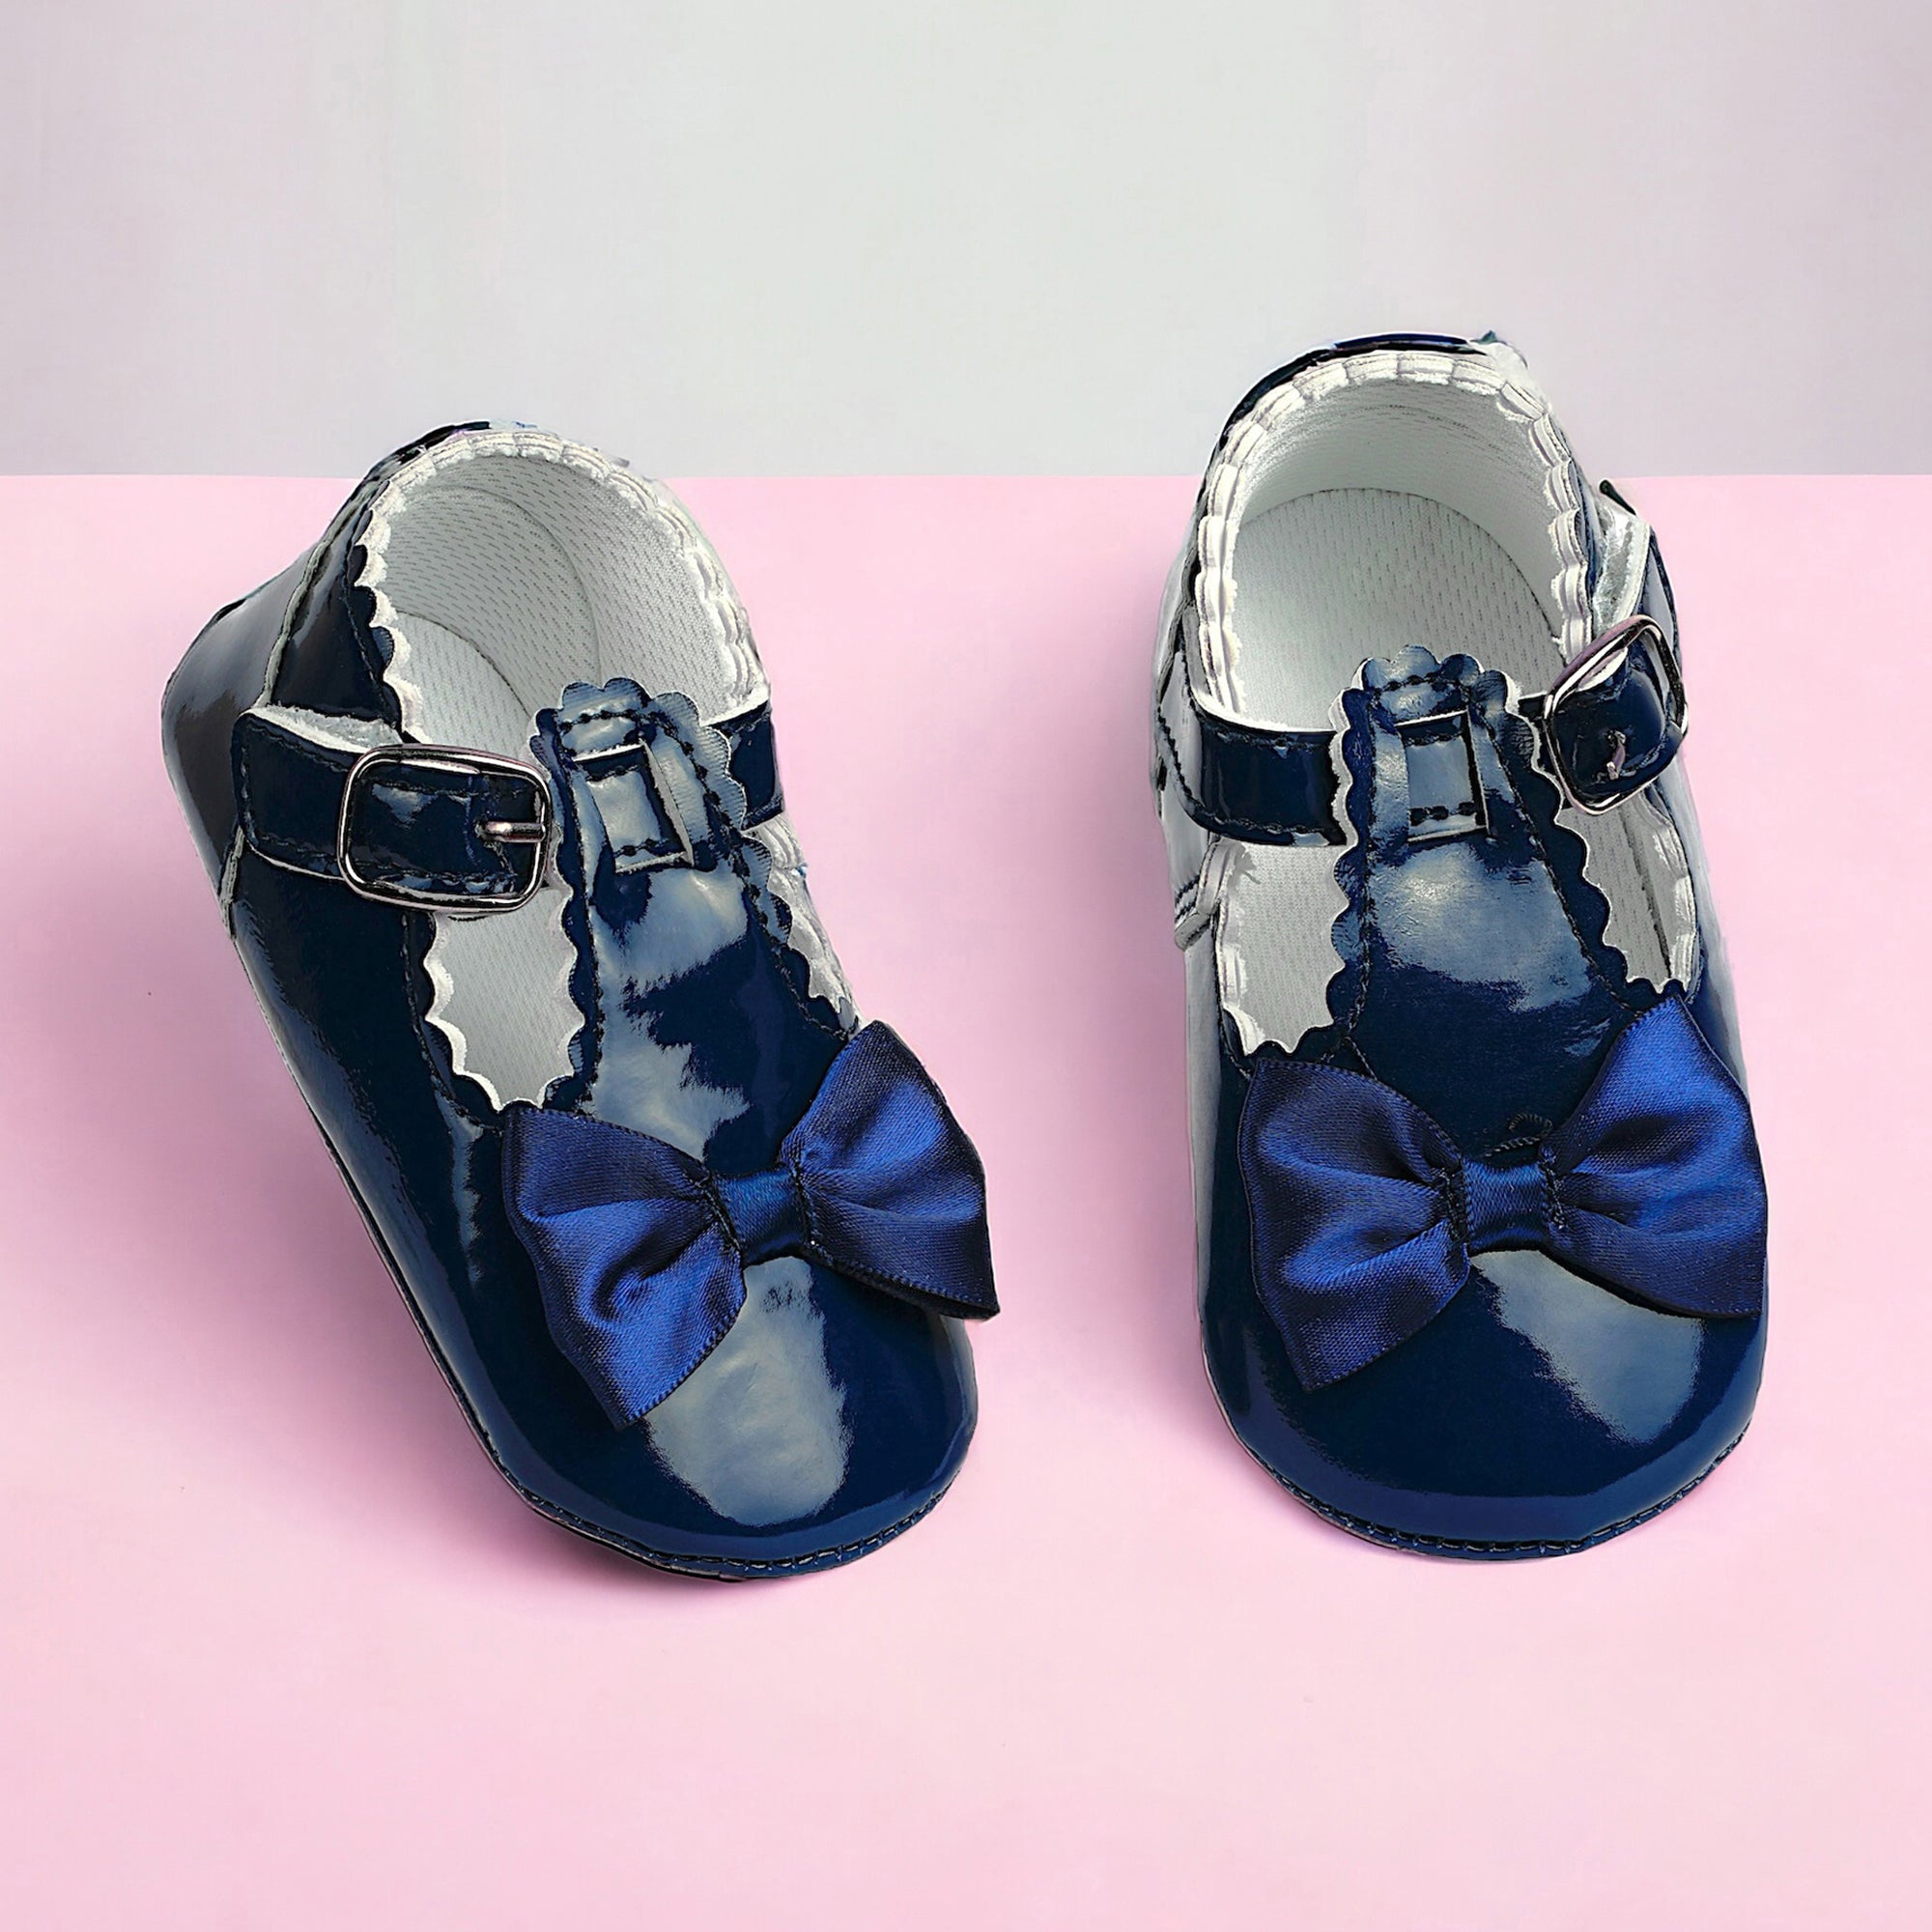 Baby Moo Mary Jane Bow Patent Leather Anti-Skid Ballerina Booties - Blue